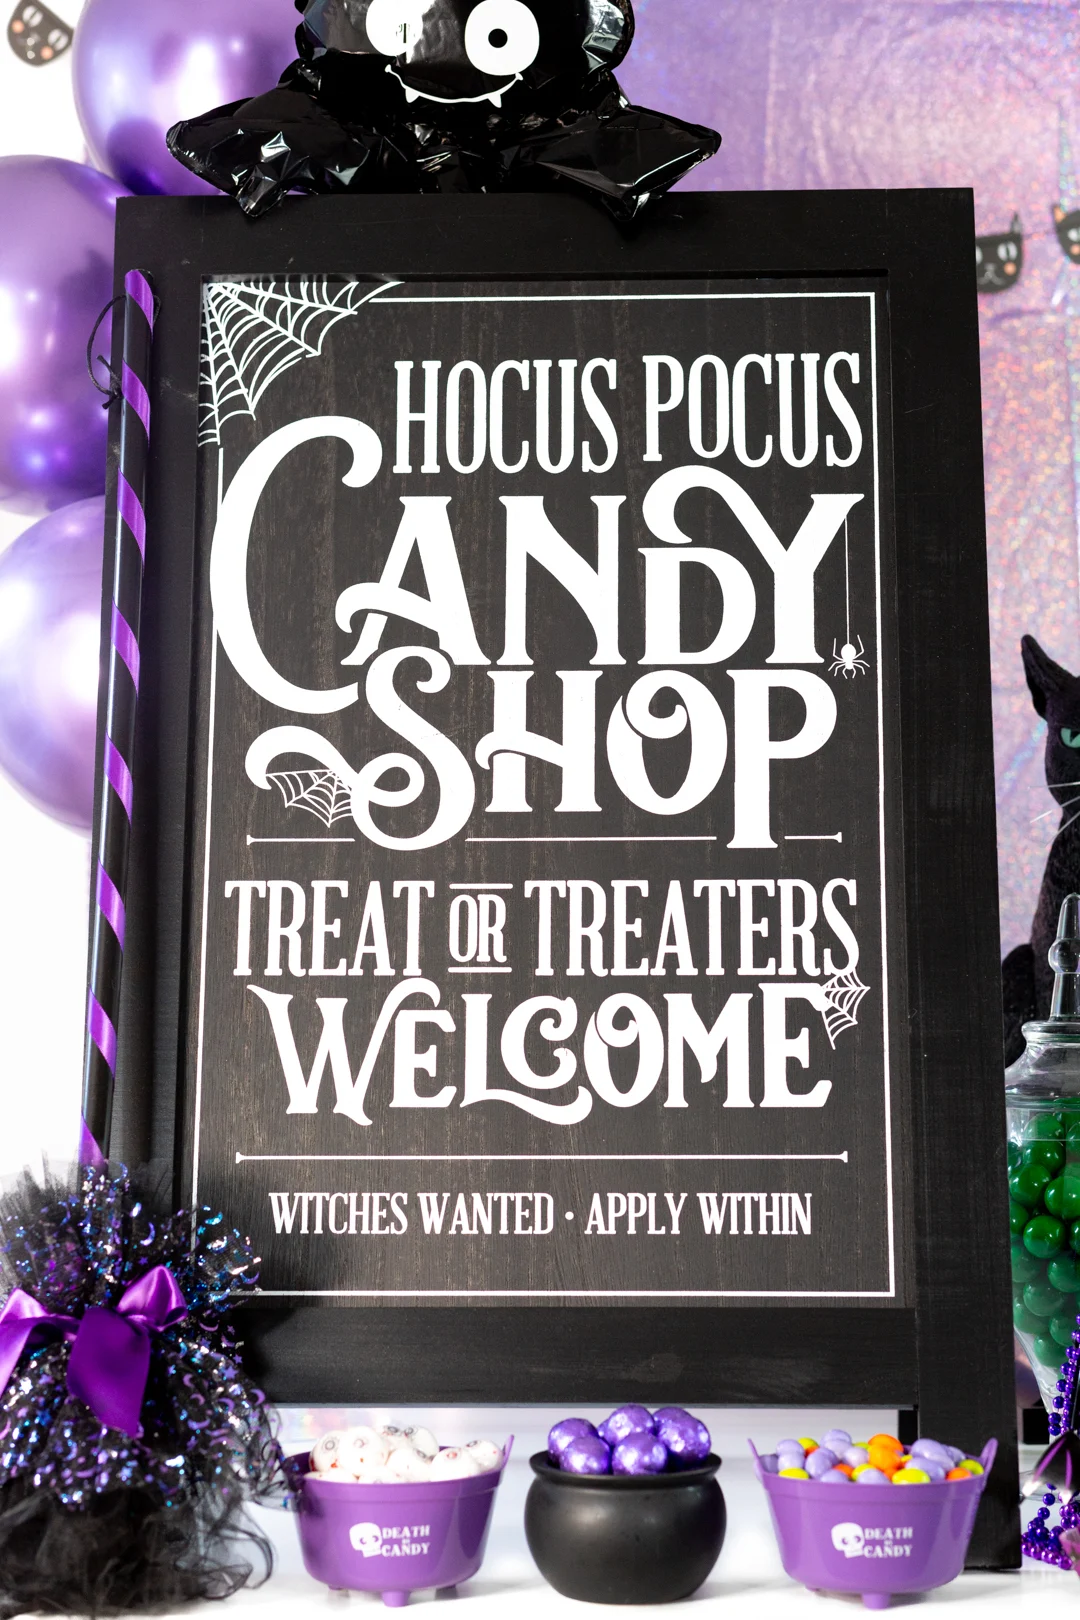 hocus pocus candy shop stand up sign